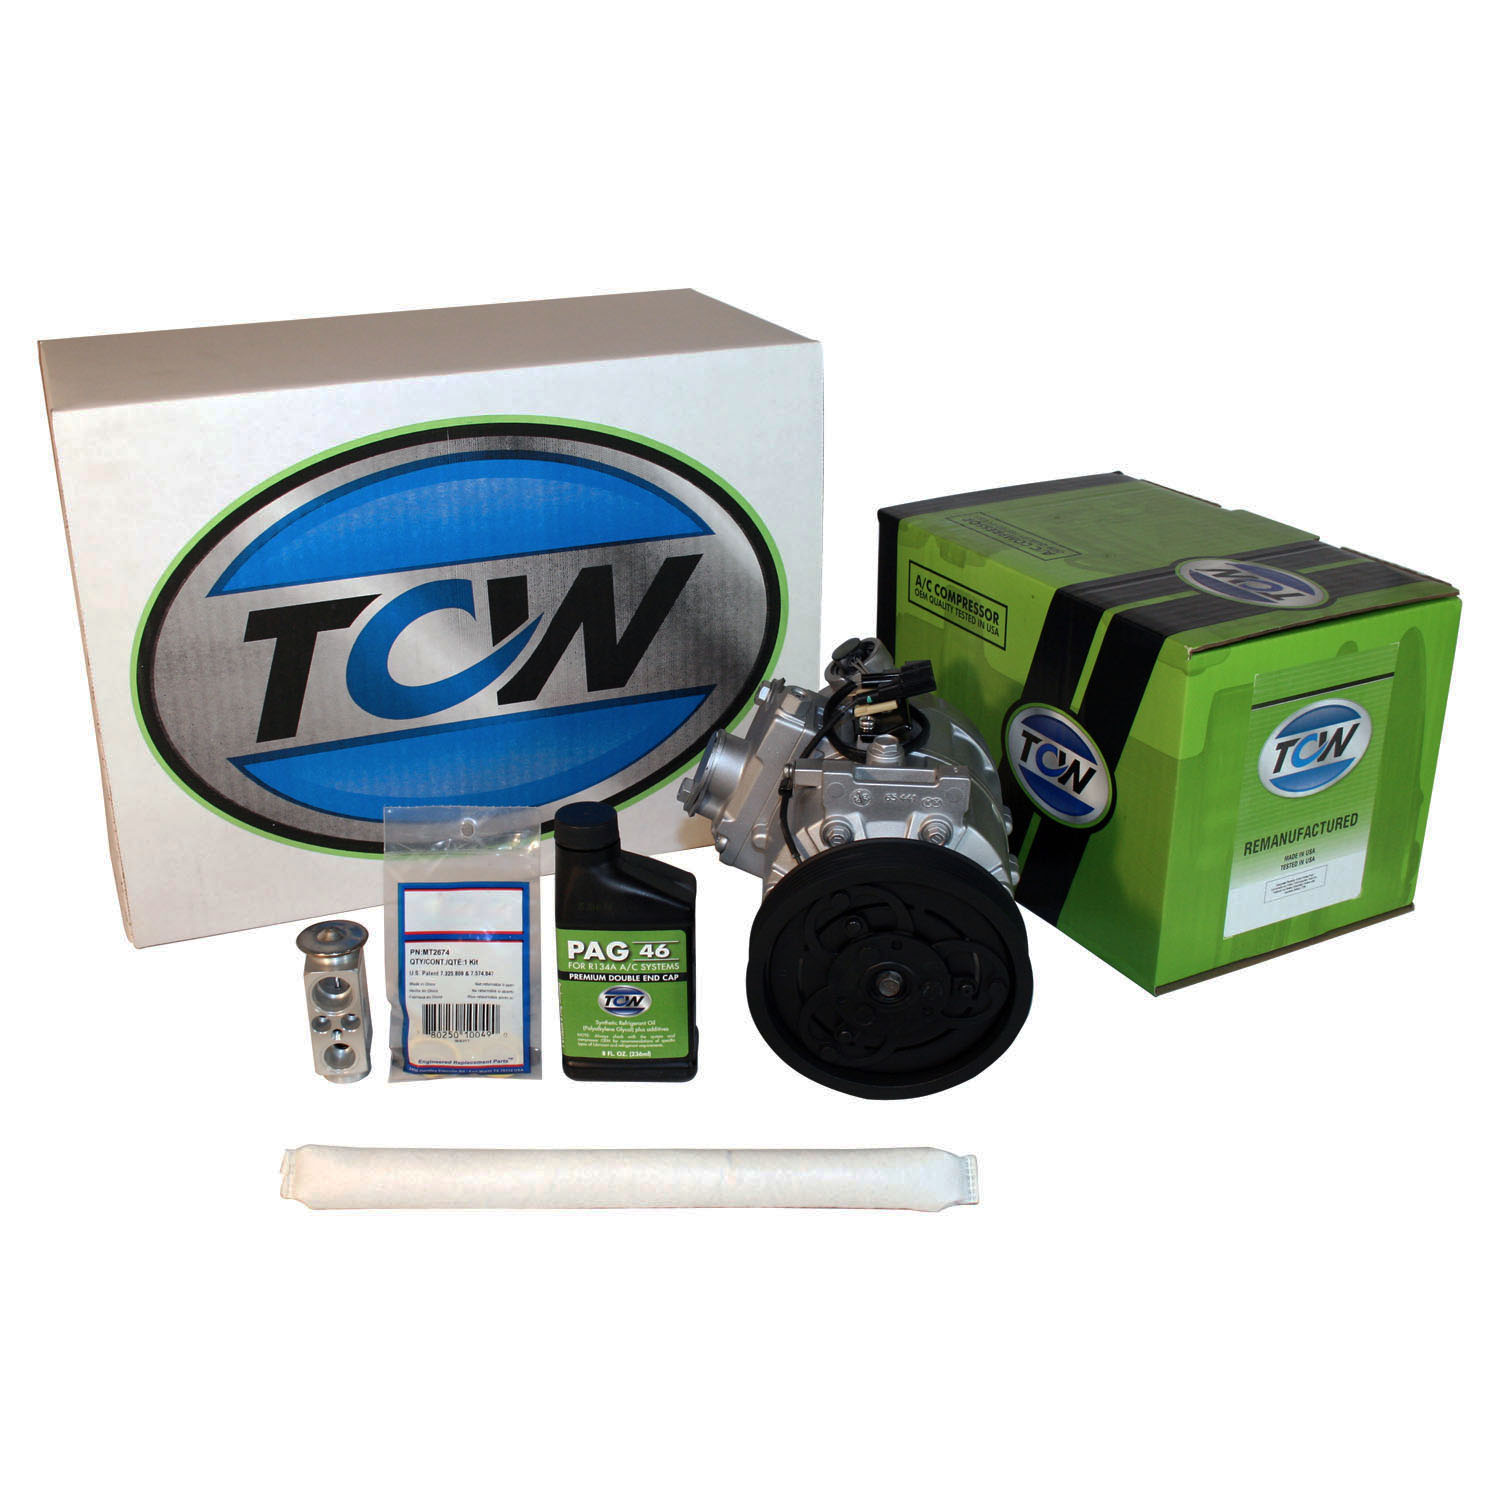 TCW Vehicle A/C Kit K1000481R Remanufactured Product Image field_60b6a13a6e67c